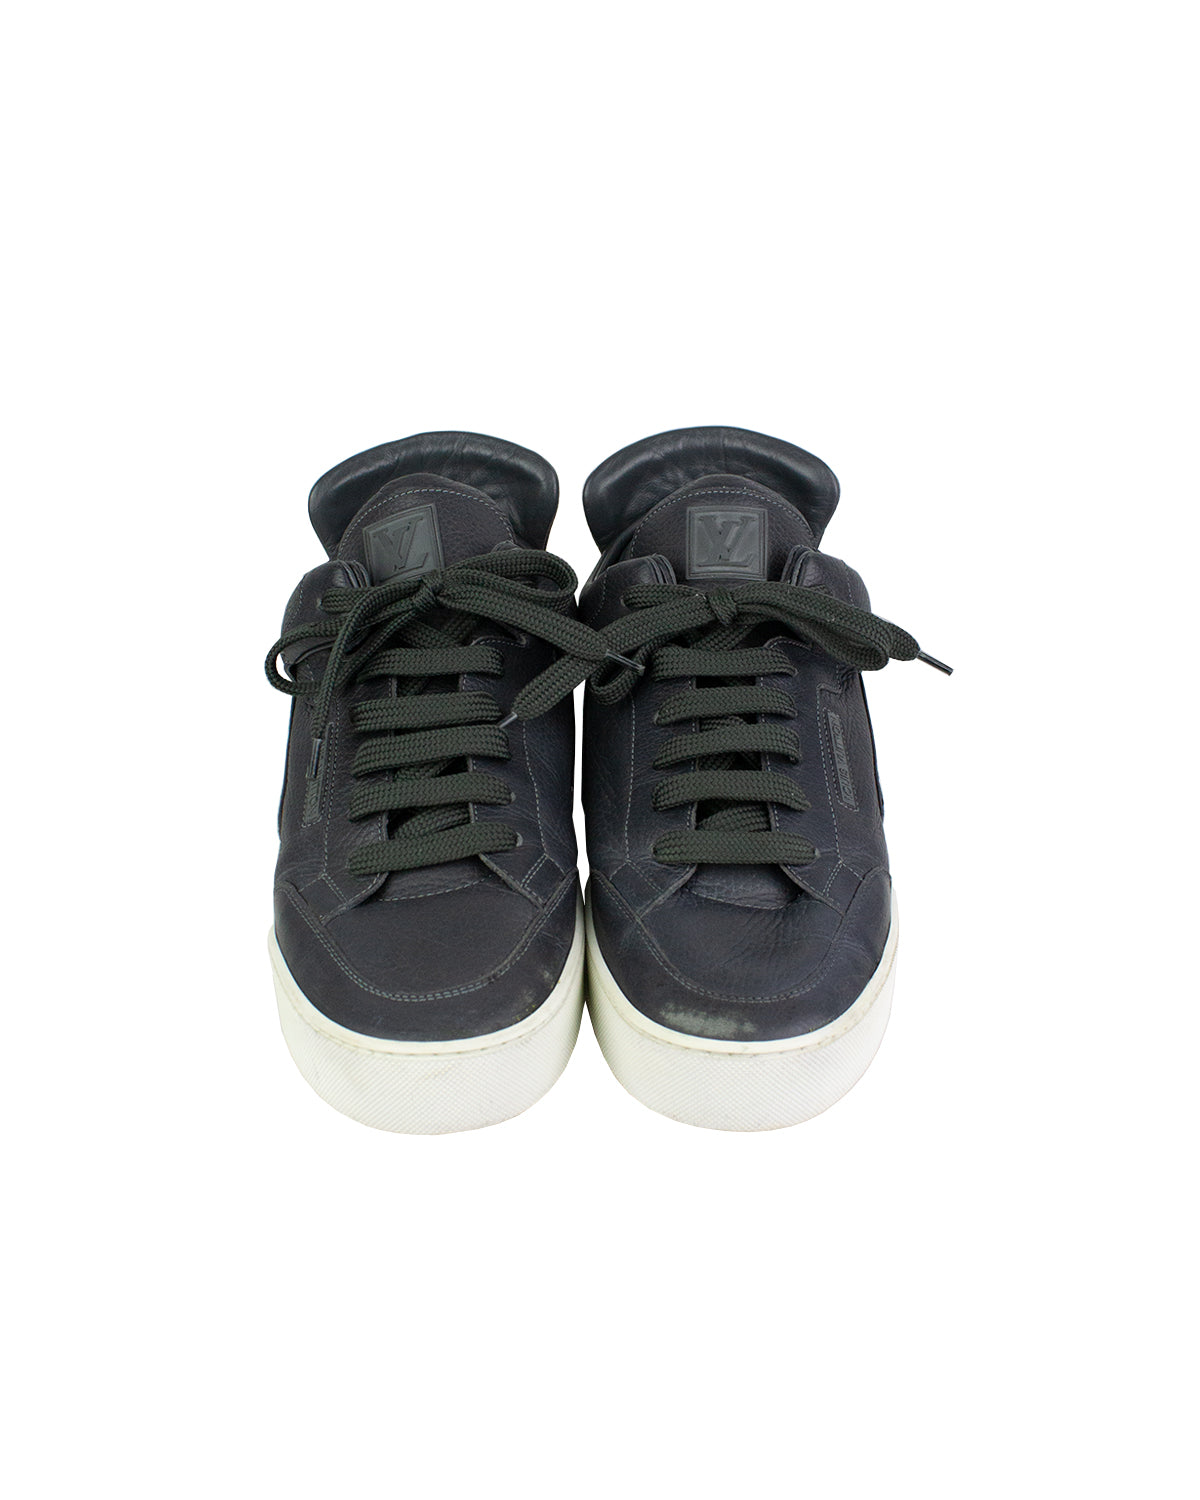 Louis Vuitton x Kanye West “Don” anthracite sneaker LV size 8